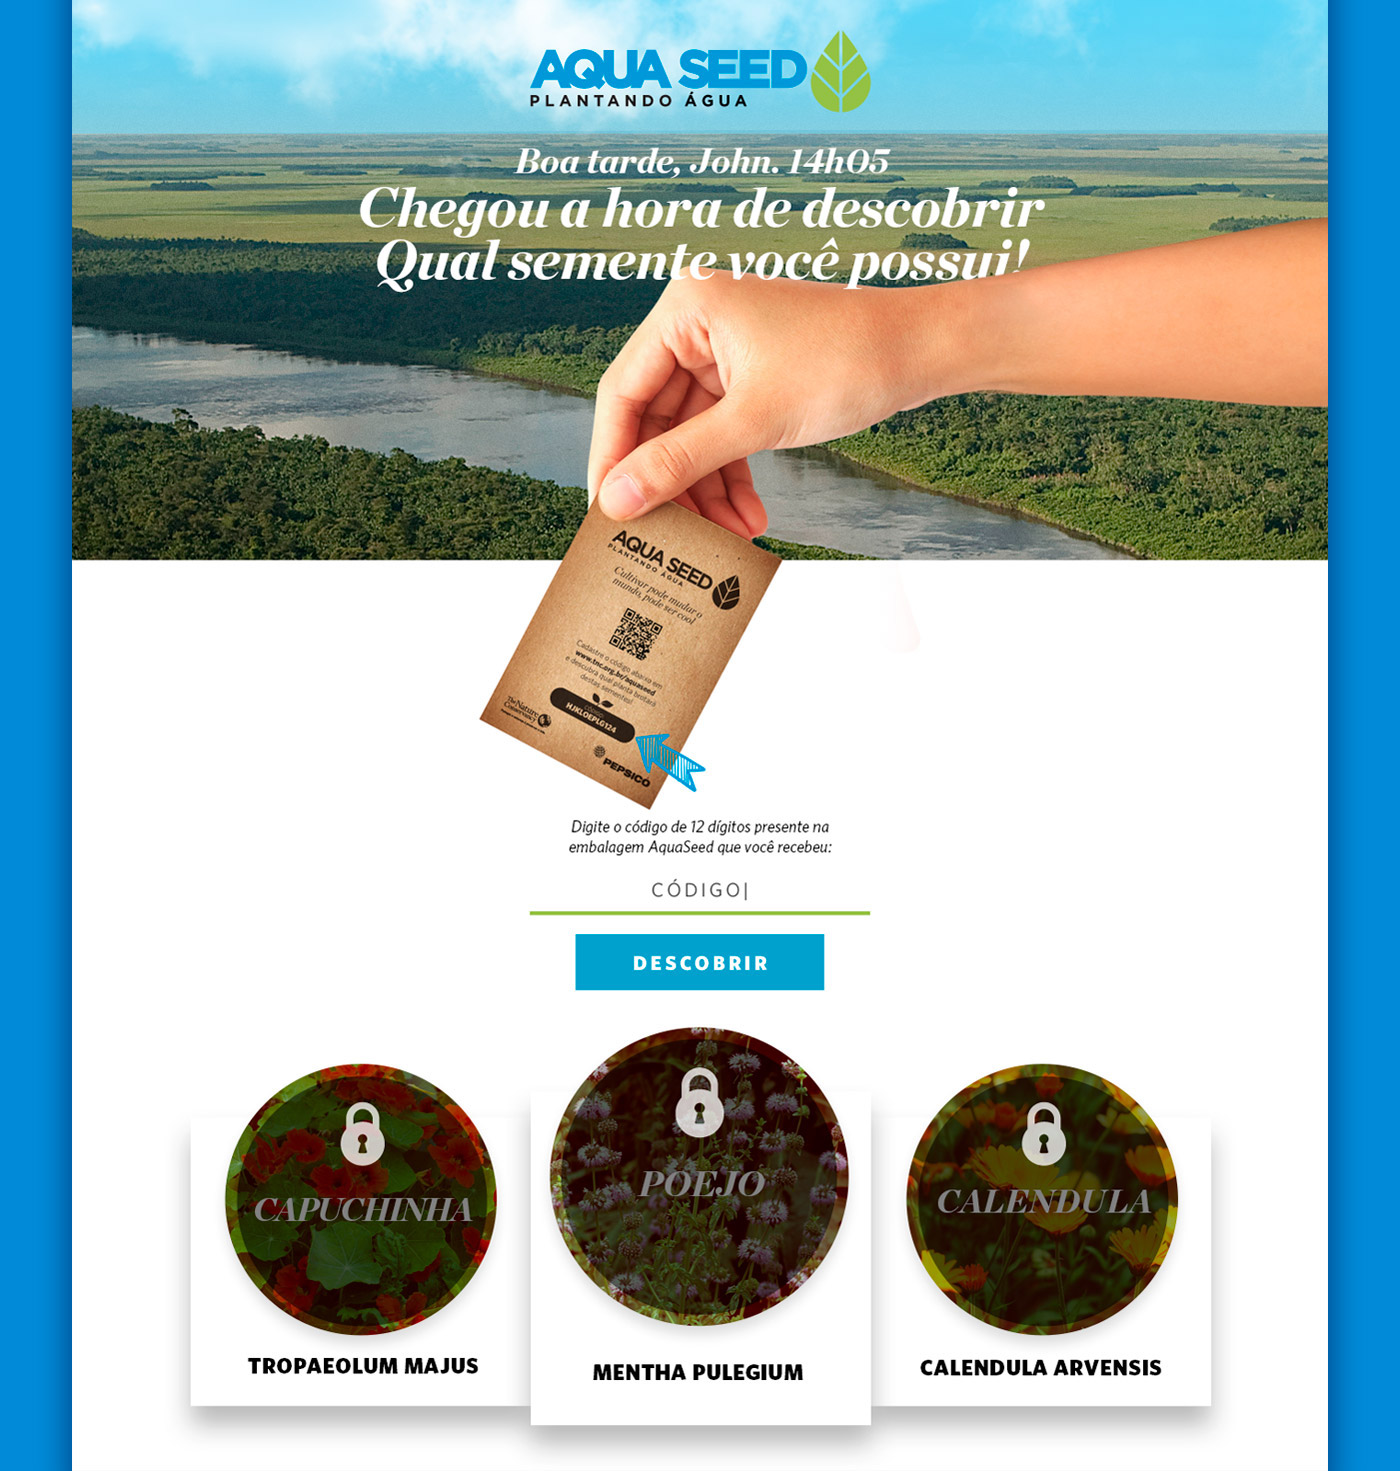 TNC The Nature Conservancy water ong ux UI aqua seed world